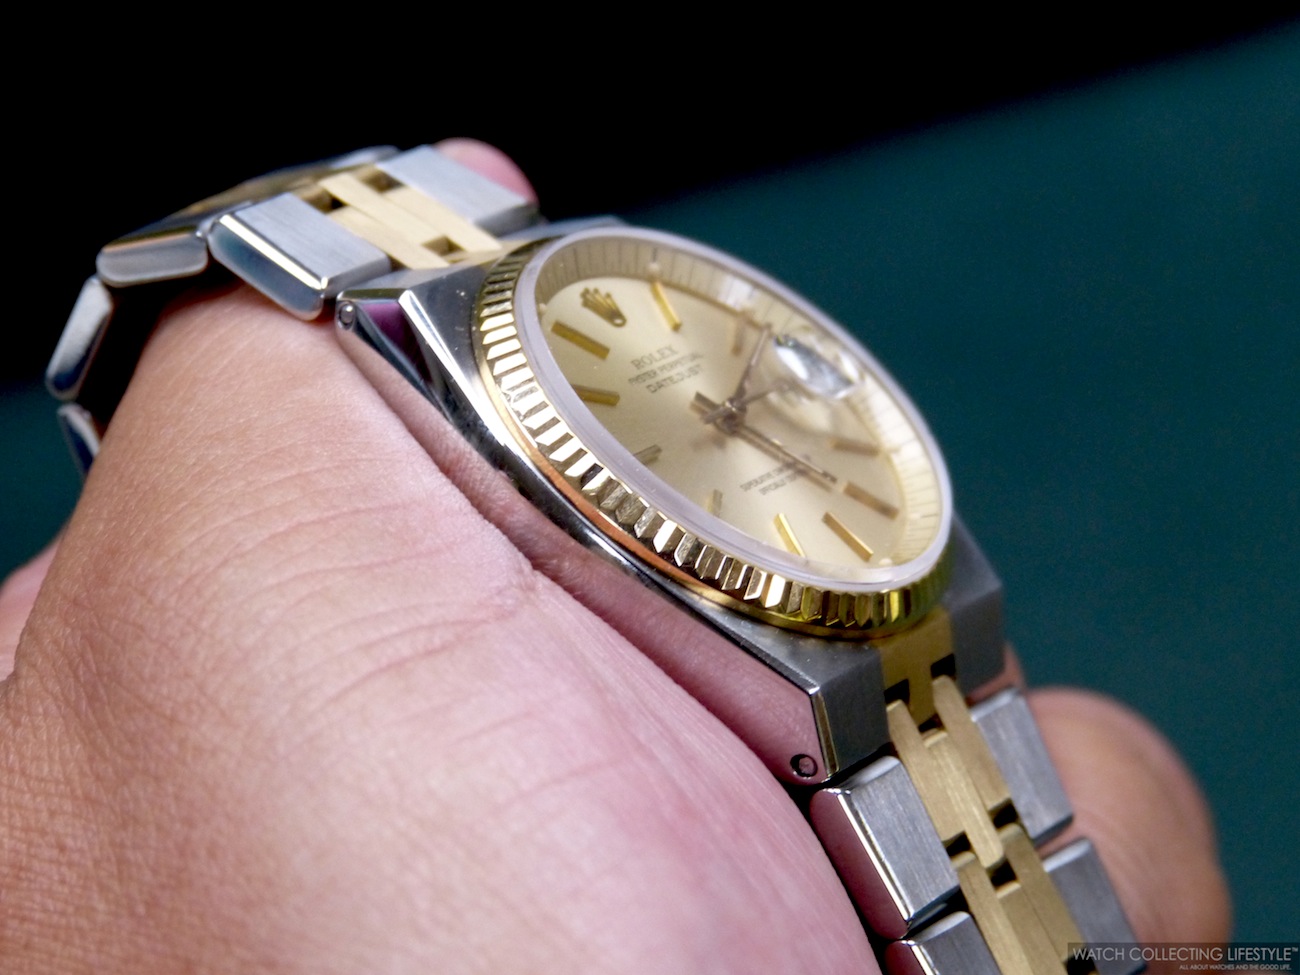 Rolex Oyster Perpetual Datejust ref 